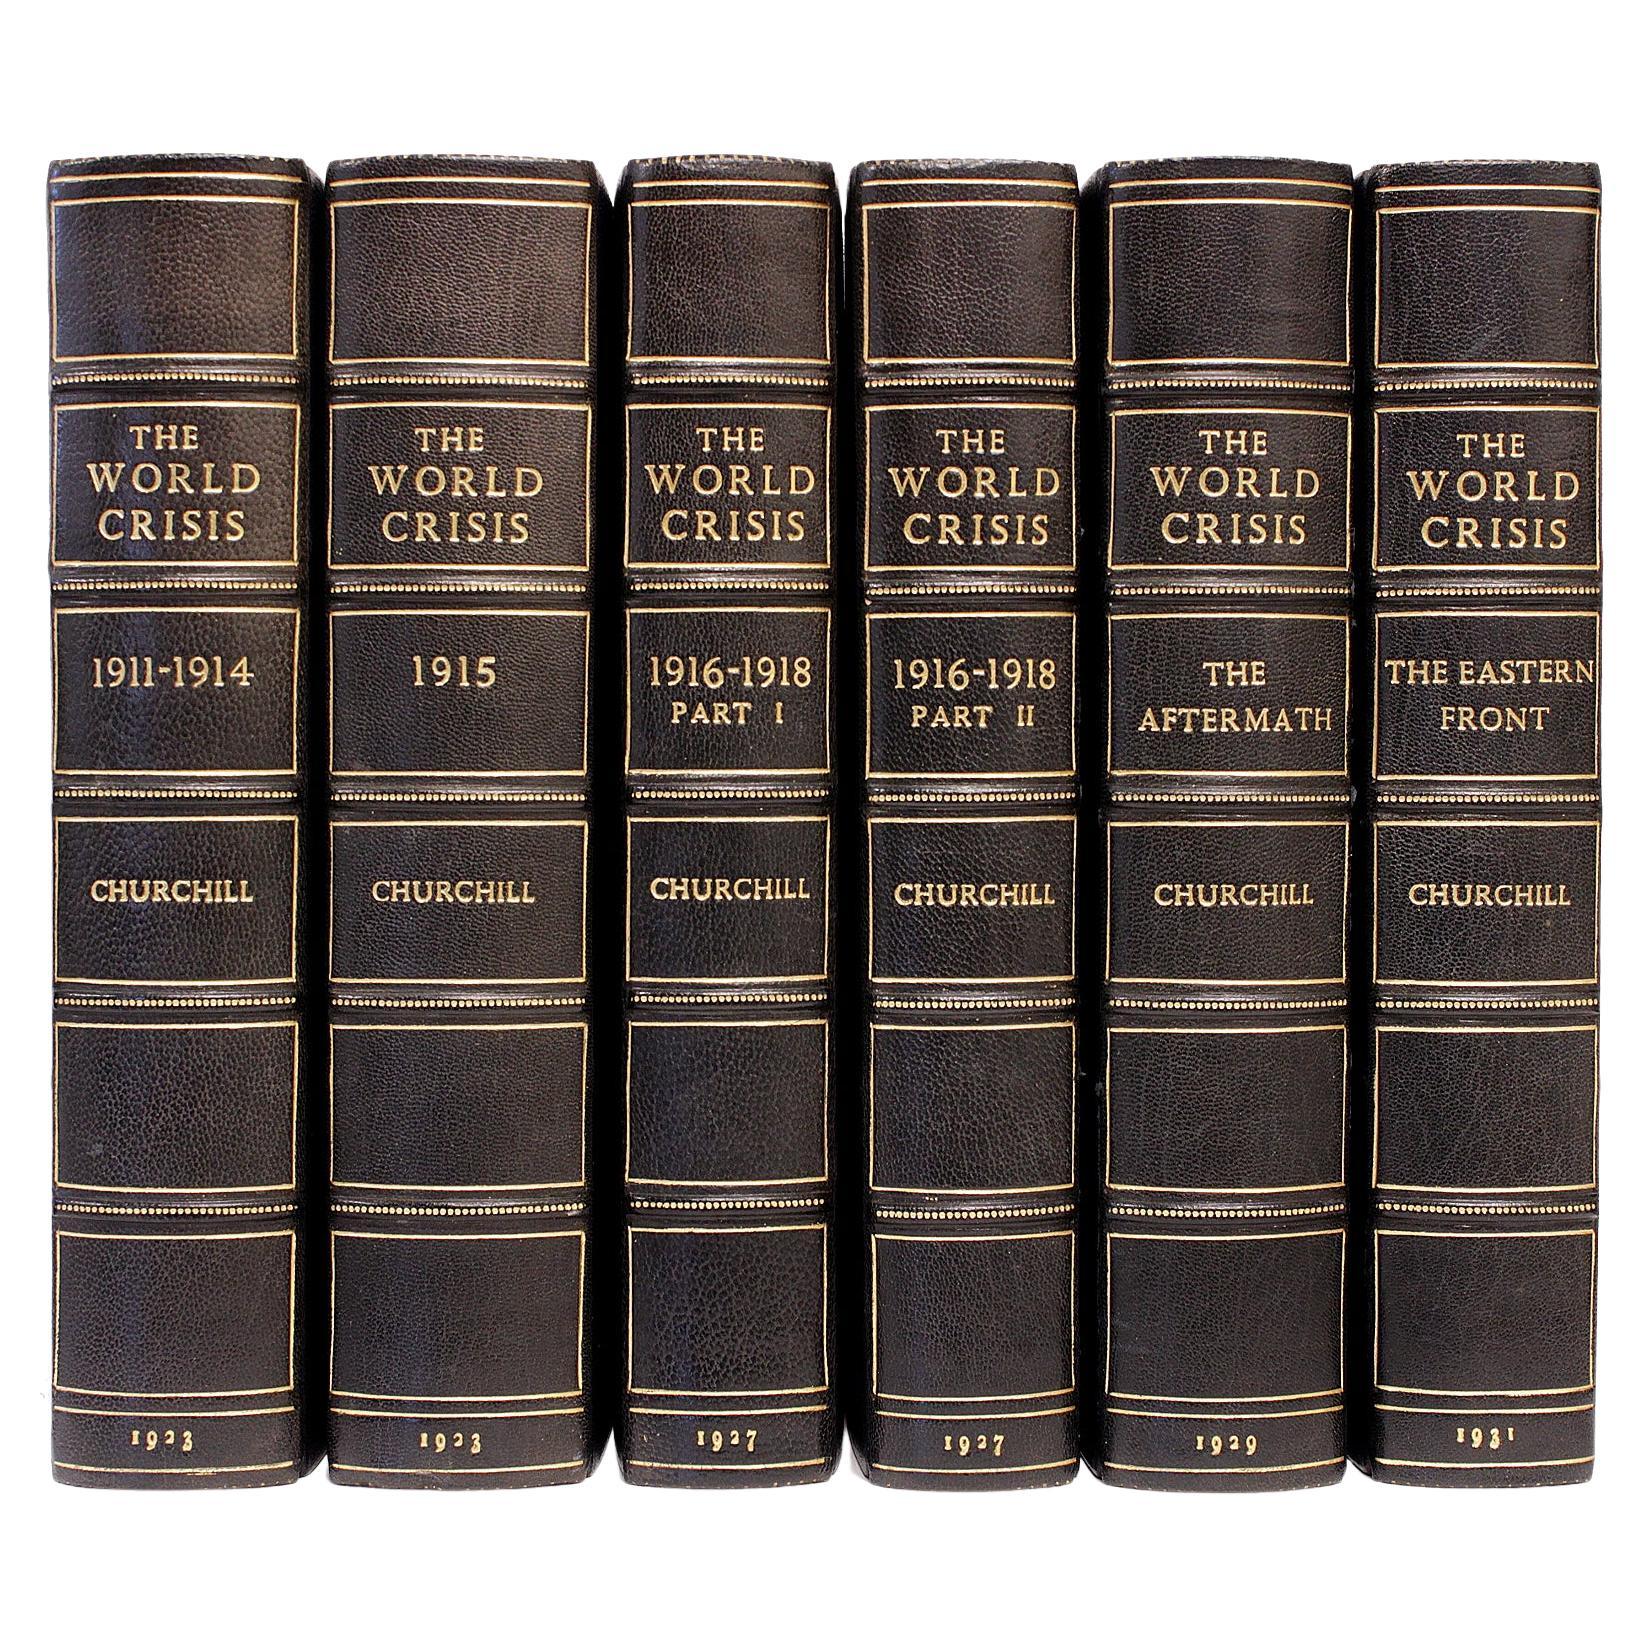 Winston CHURCHILL. The World Crisis - 6 vols. - ALL FIRST EDITIONS 1923-1931